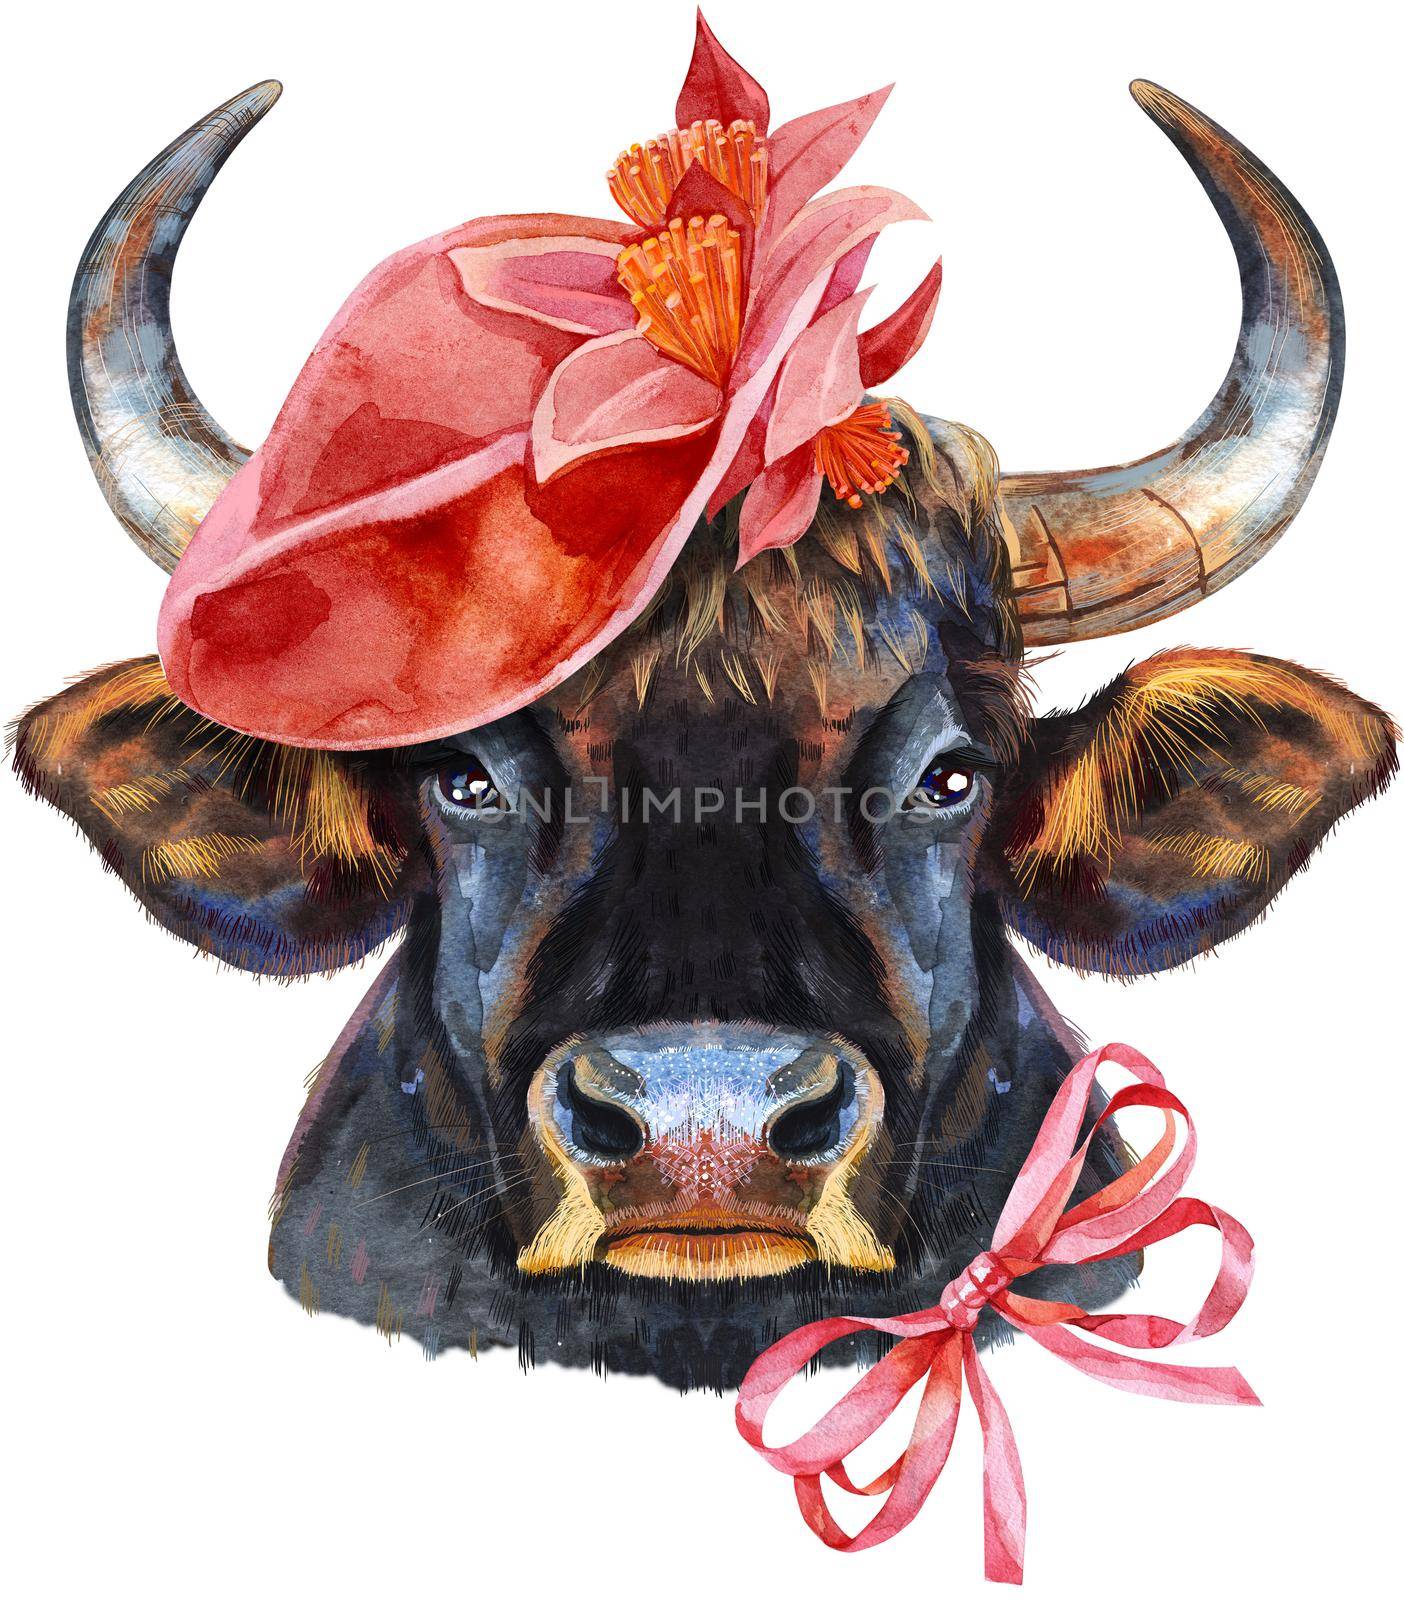 Bull in red hat and bow. Watercolor graphics. Bull animal illustration watercolor textured background.